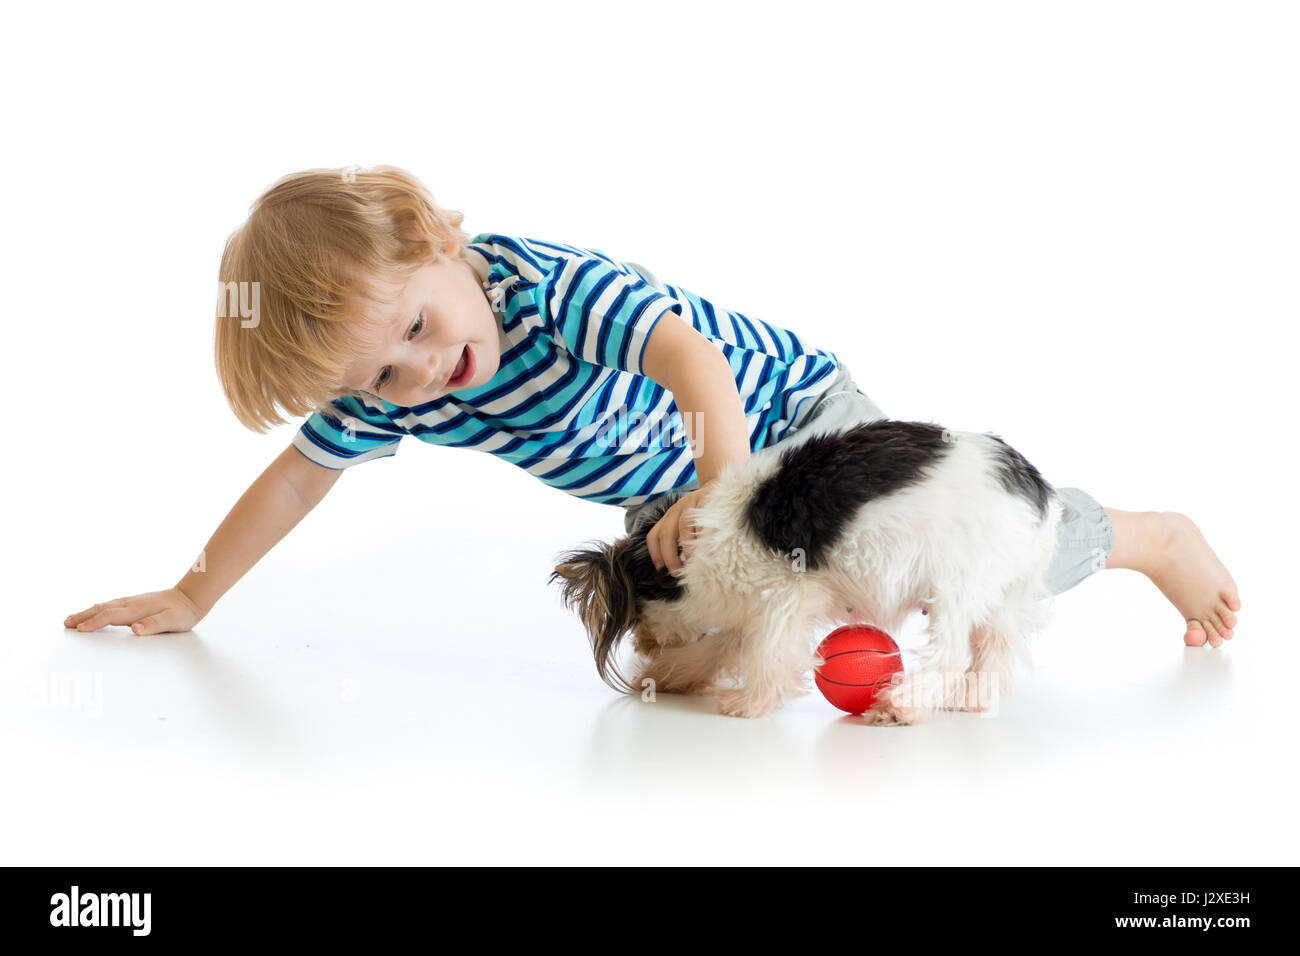 Little boy playing with dog, isolated on white background Stock Photo